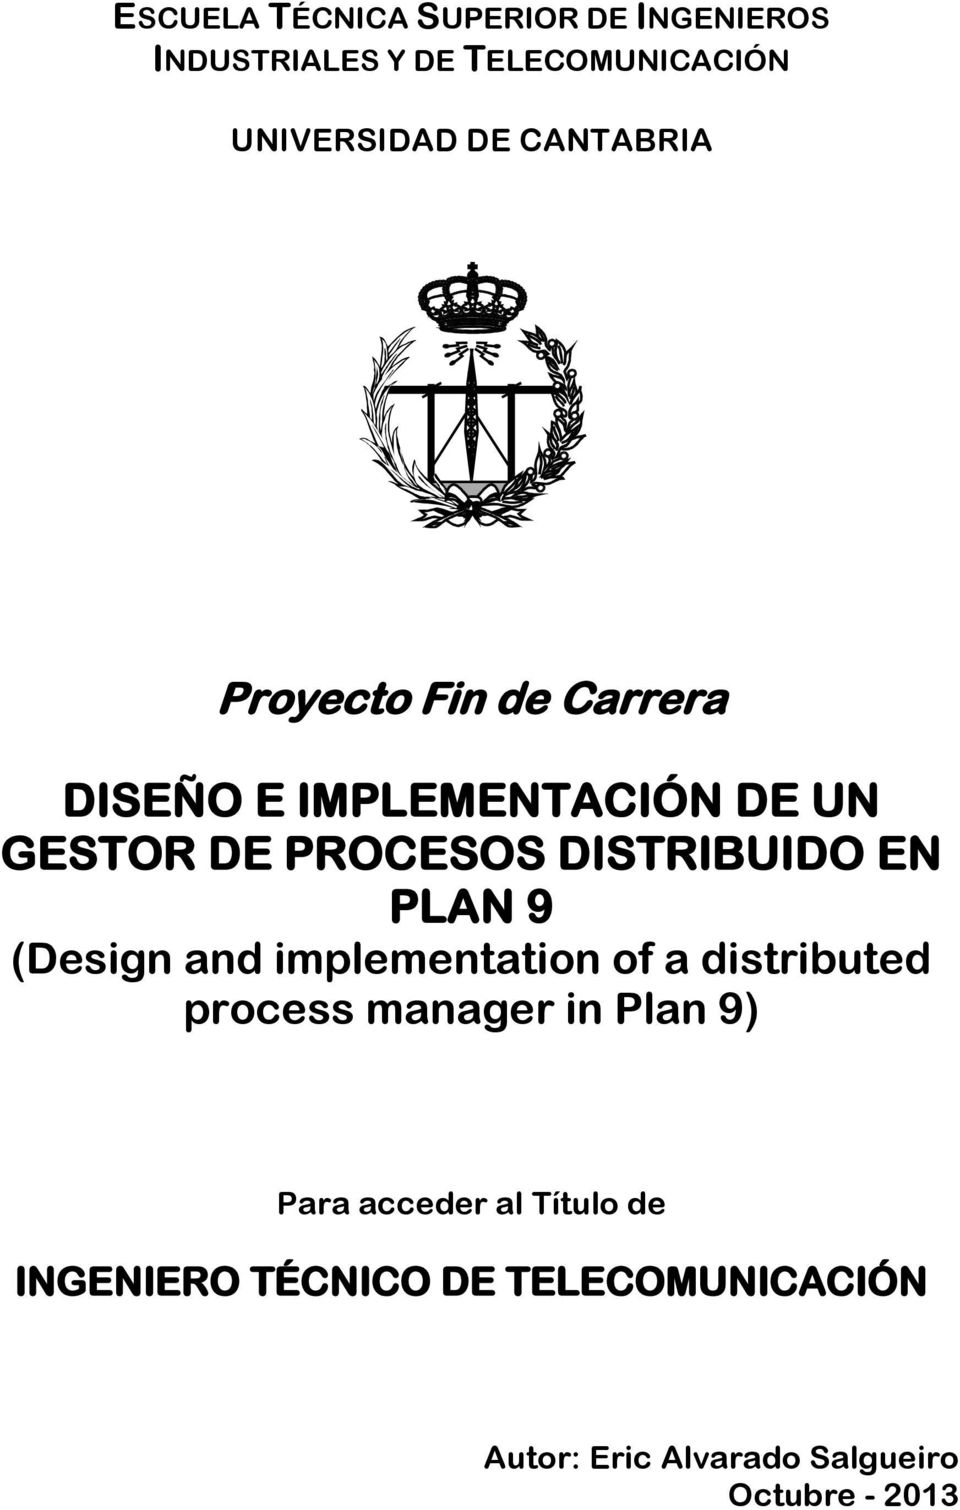 DISTRIBUIDO EN PLAN 9 (Design and implementation of a distributed process manager in Plan 9)